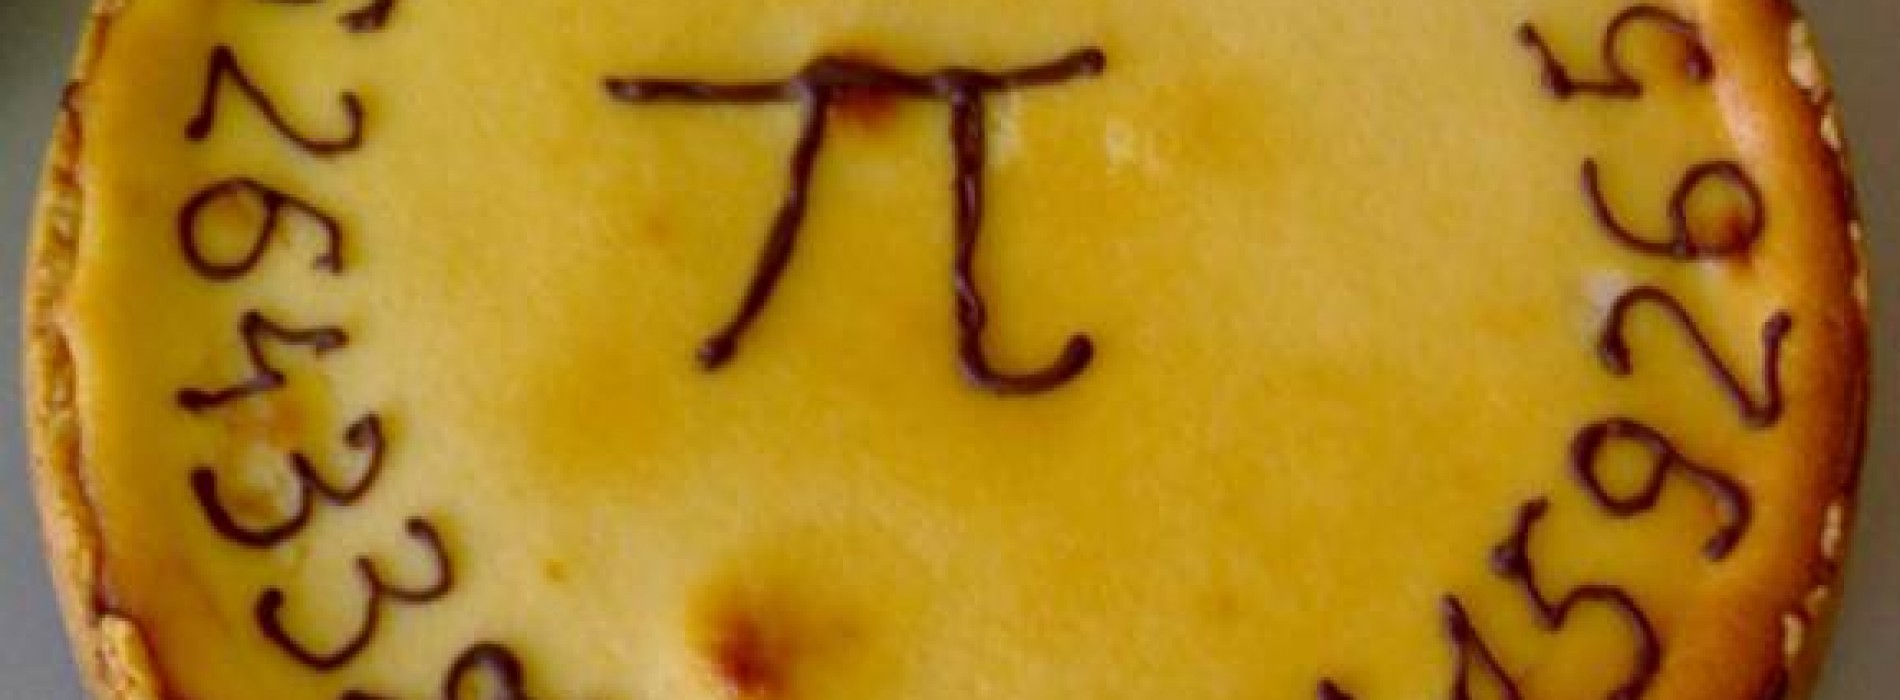 good time to do something irrational – Pi Day